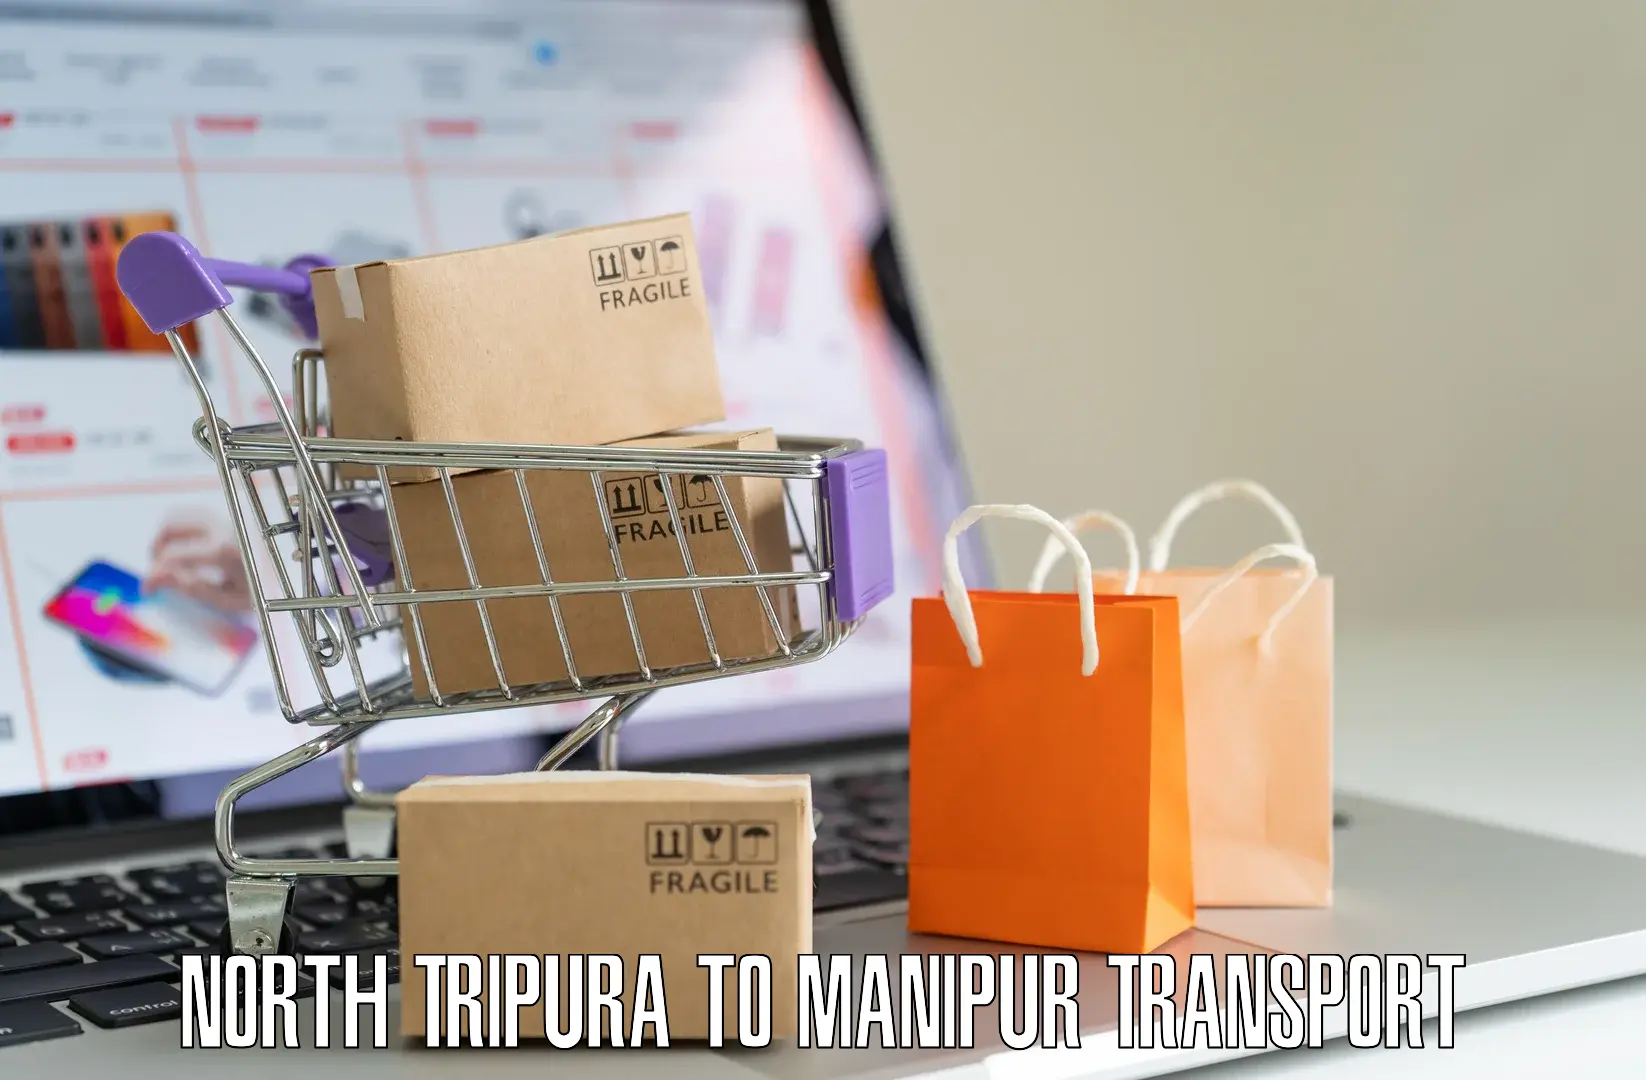 Road transport online services North Tripura to Imphal